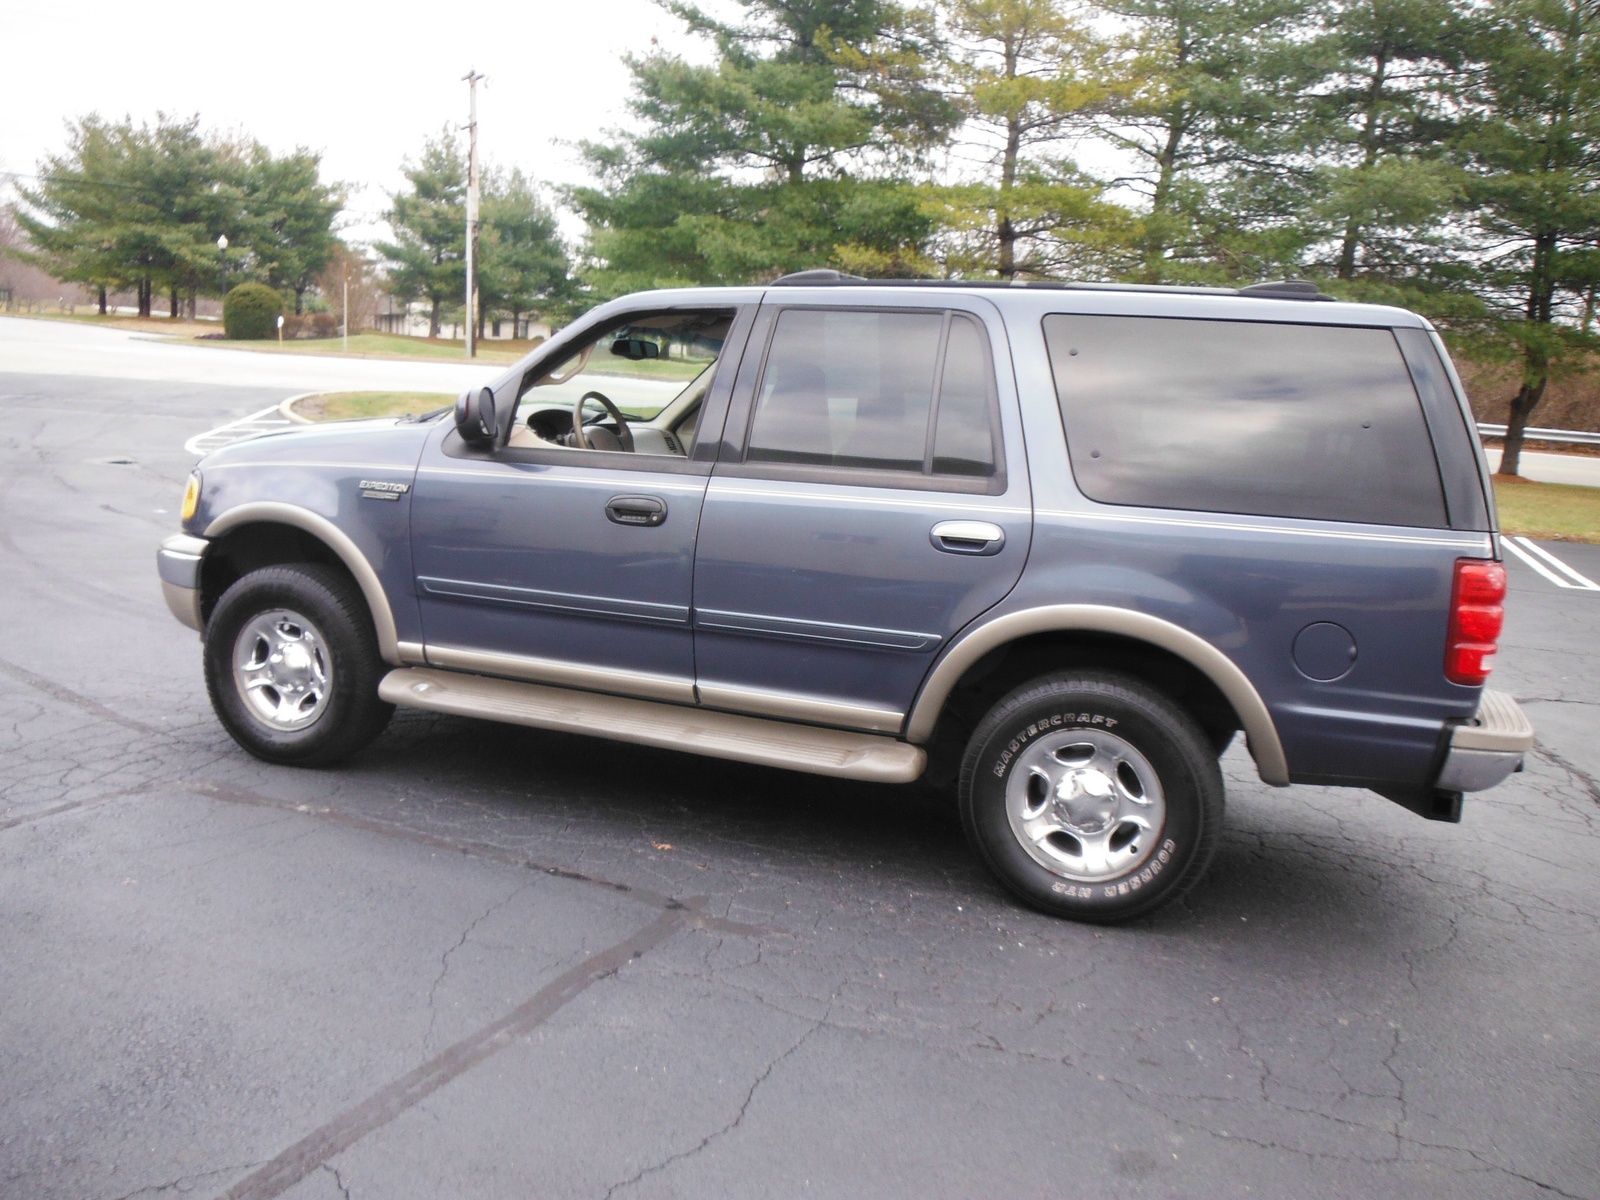 Download Pdf Eddie Bauer Ford Expedition 2004 Manual